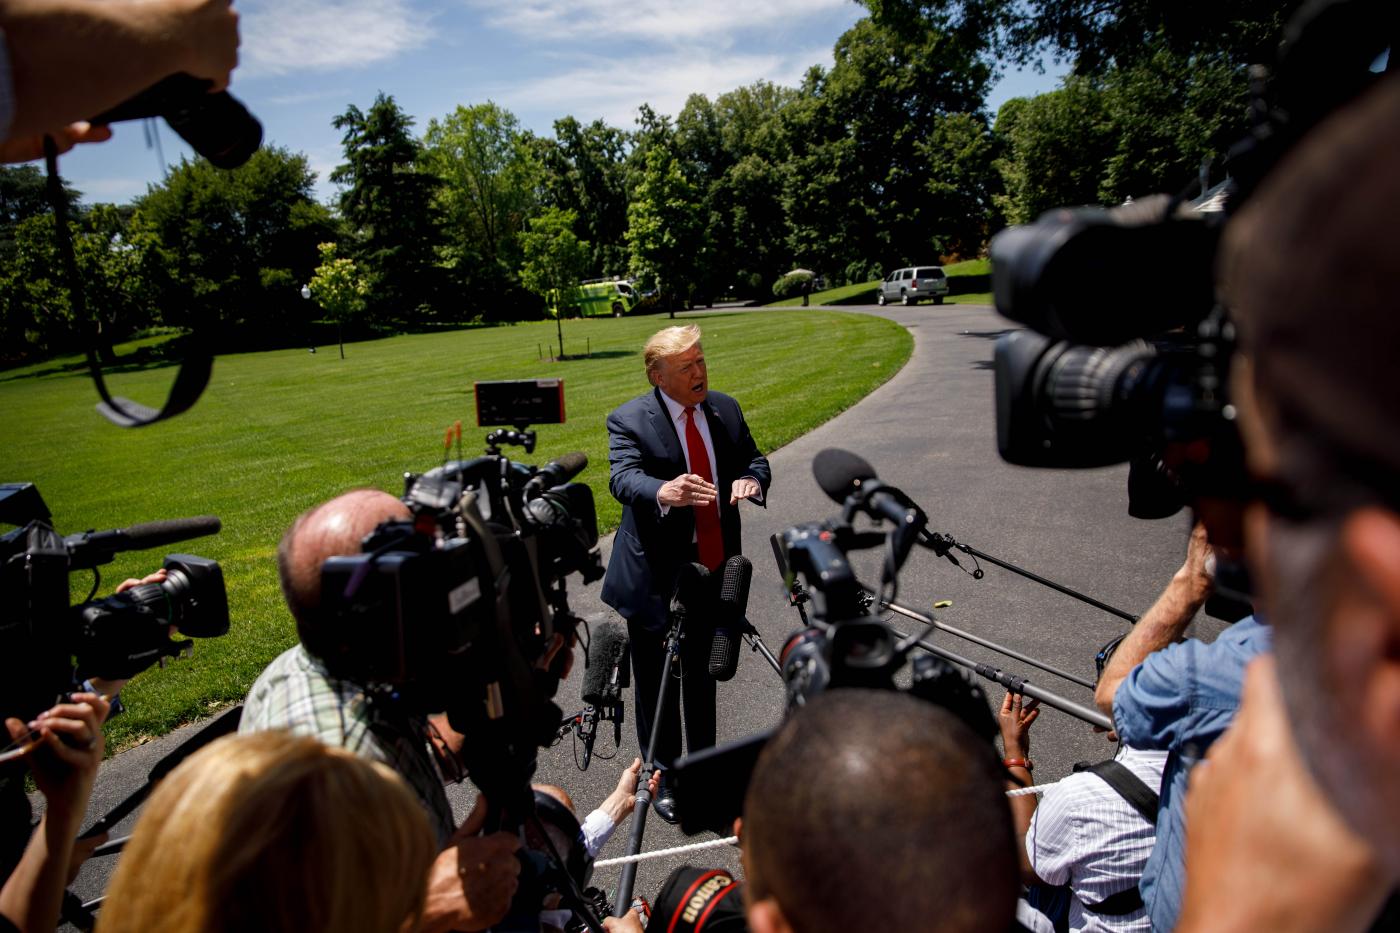 WASHINGTON D.C., May 25, 2019 (Xinhua) -- U.S. President Donald Trump speaks to reporters before leaving the White House in Washington D.C., the United States, on May 24, 2019. Donald Trump said on Friday that his country will send about 1,500 additional troops to the Middle East amid escalating tension with Iran. Trump told reporters at the White House that the extra deployment, which is "relatively small number of troops," is mainly a protective measure. (Xinhua/Ting Shen/IANS) by Ting Shen.